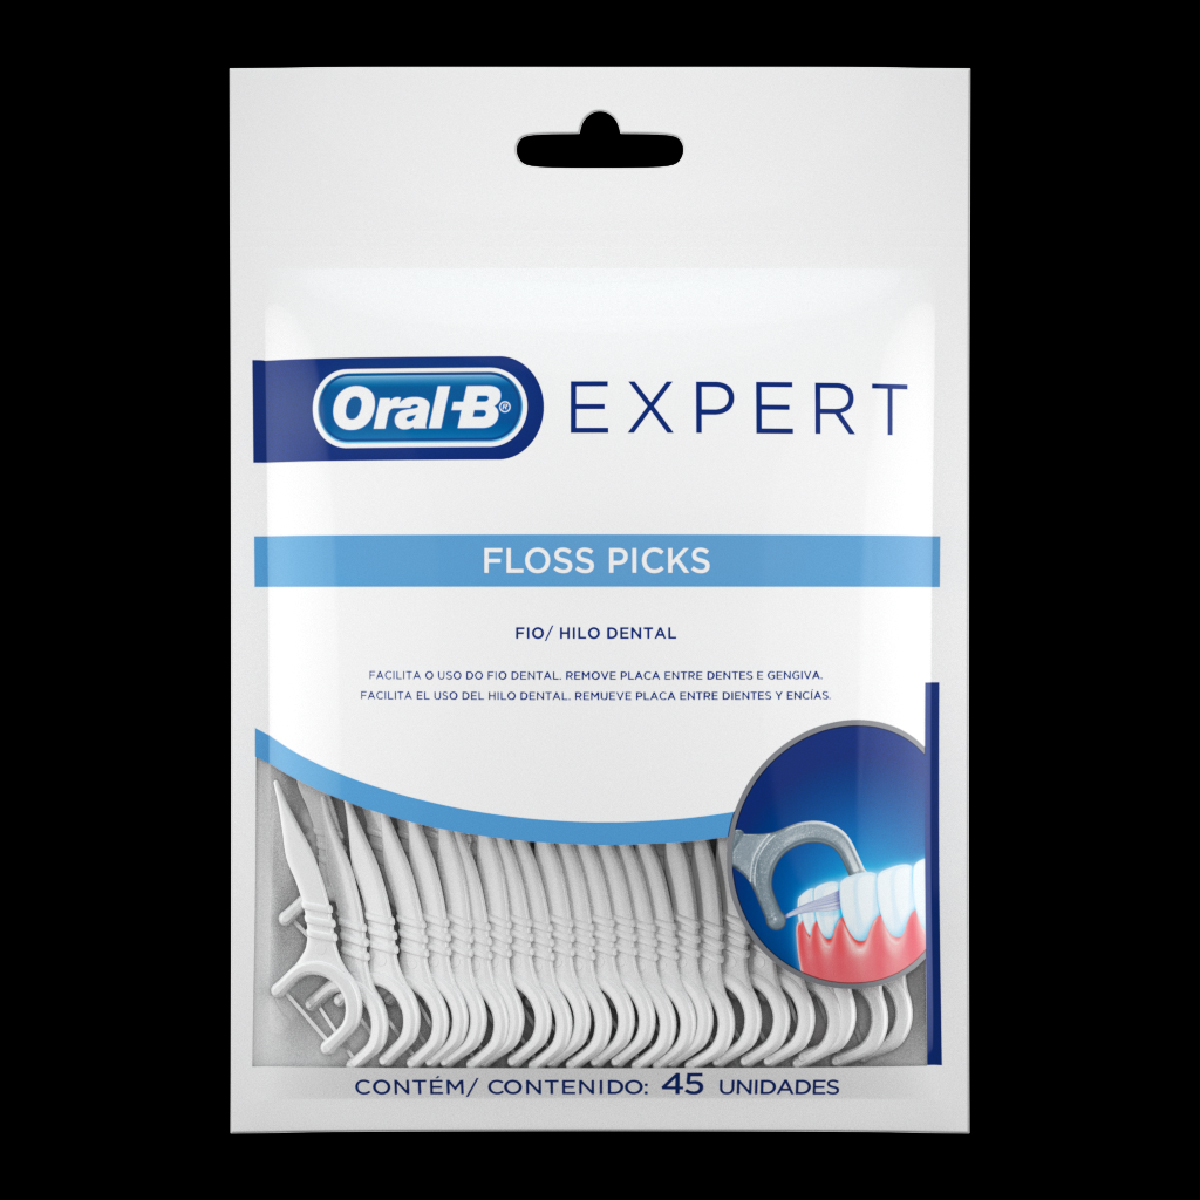 Oral-B Expert Floss Picks 45 Unidades undefined